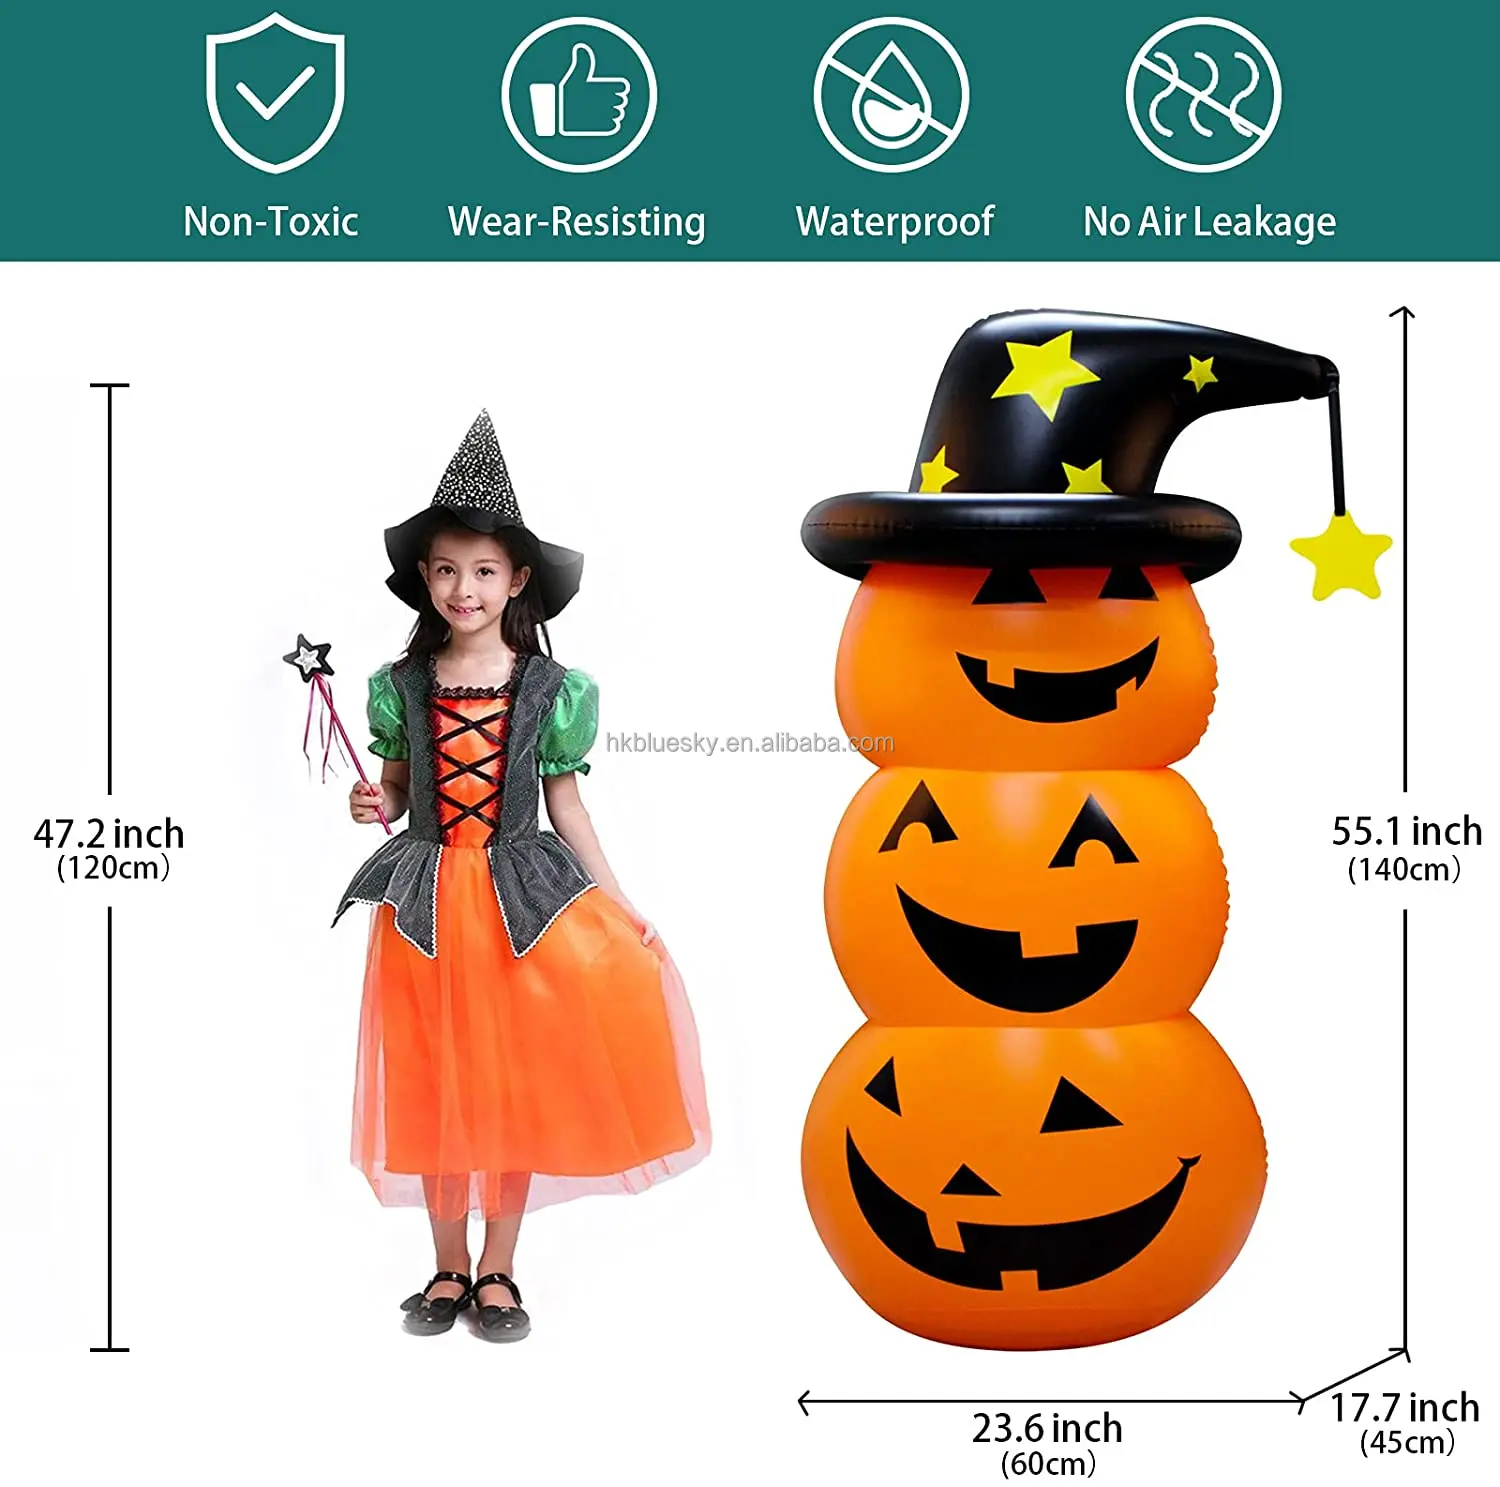 4.6 Ft Pumpkin Tumbler Inflatable Yard Decoration with Witch Hat Outside Yard Party Halloween Decorations Pump not Included Halloween Inflatables Pumpkin Decorations Outdoor 